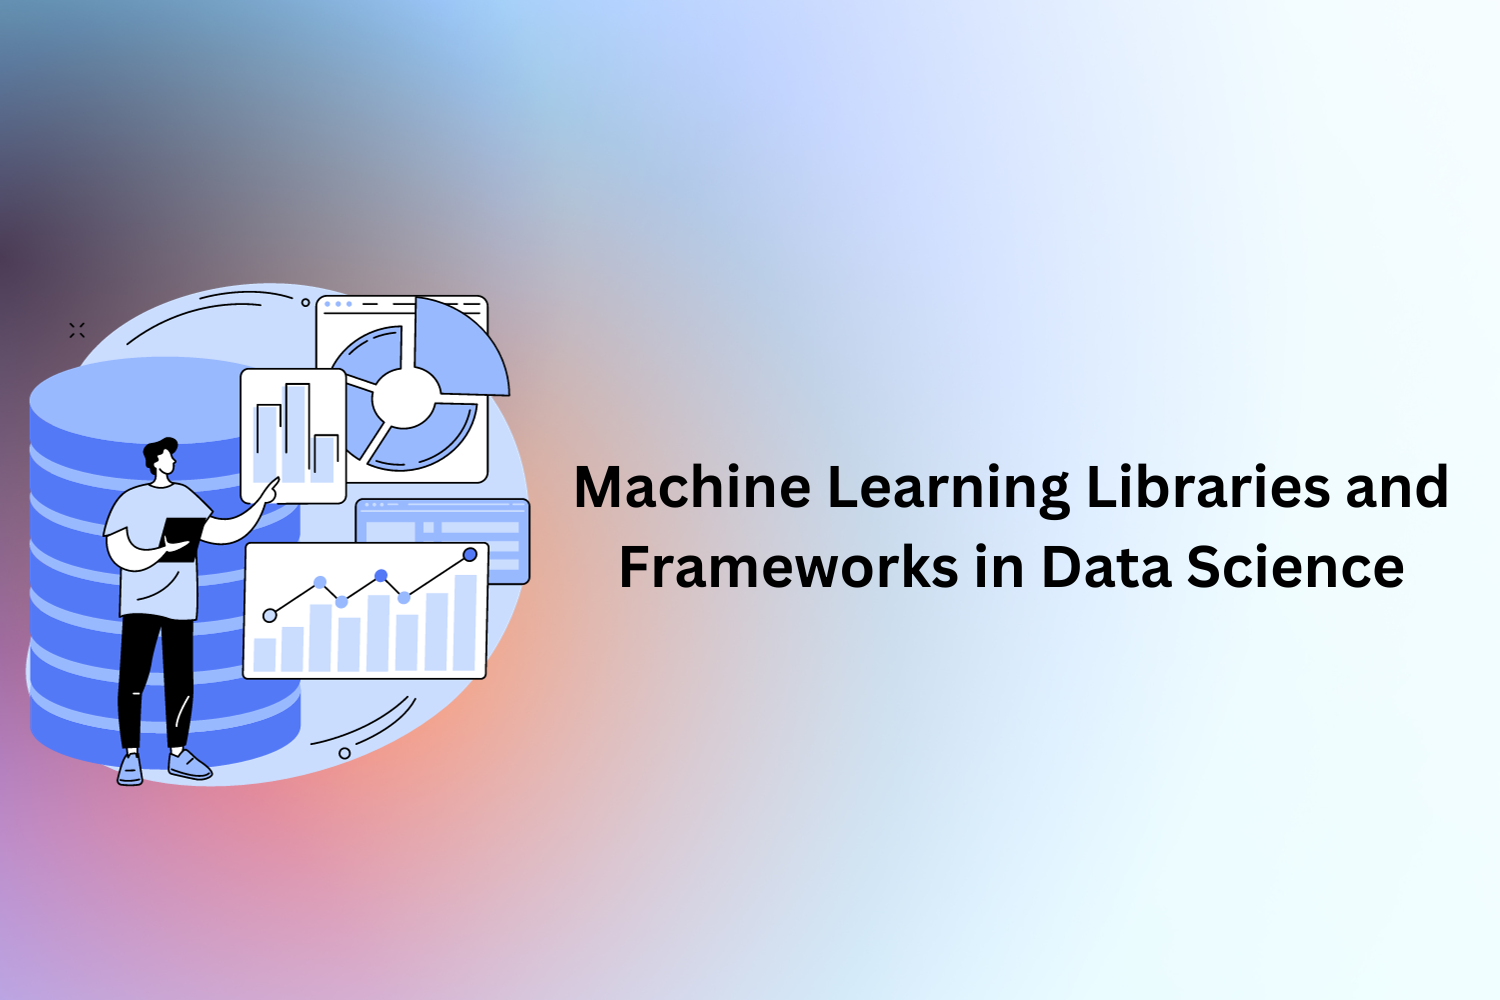 Machine Learning Libraries and Frameworks in Data Science